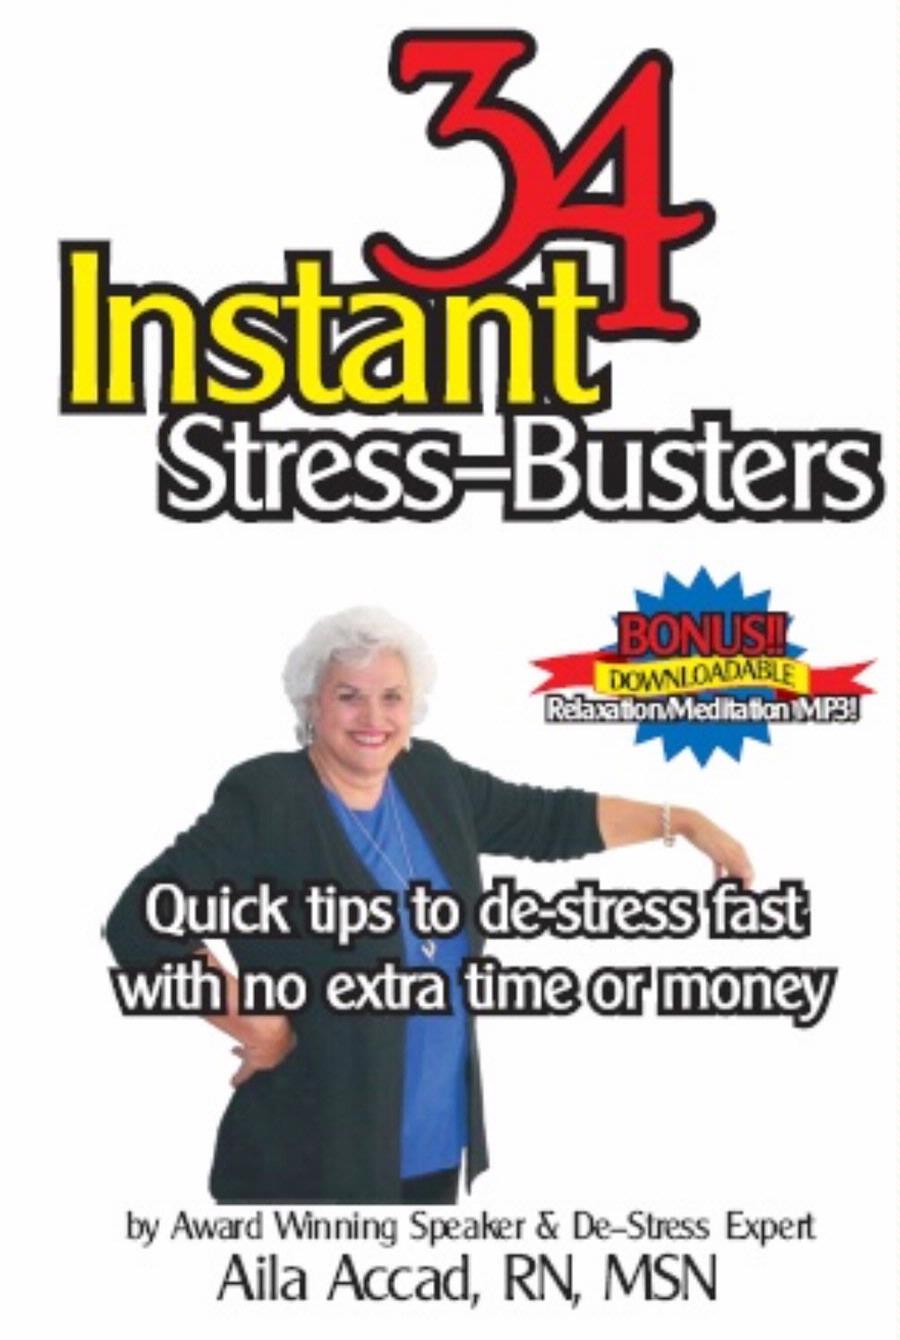 15 - 101922 - Book: 34 Instant Stress-Busters by Aila Accad, RN - 